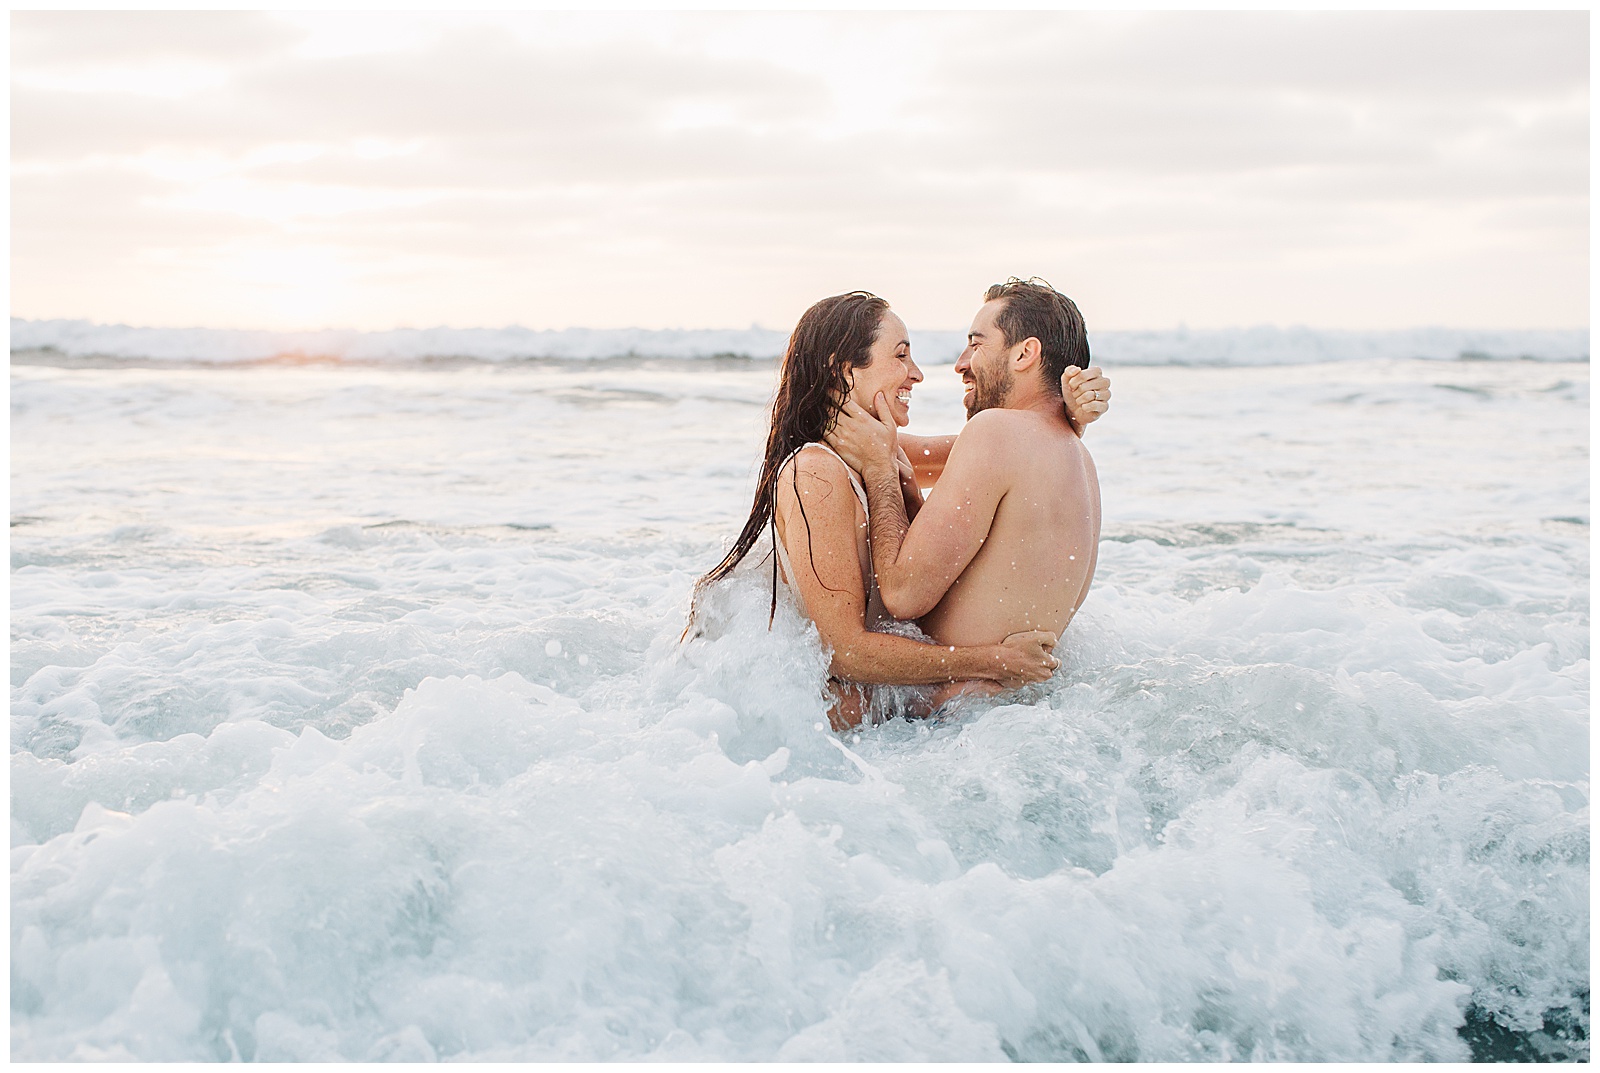 san diego wedding photographer - engagement session in water - beach